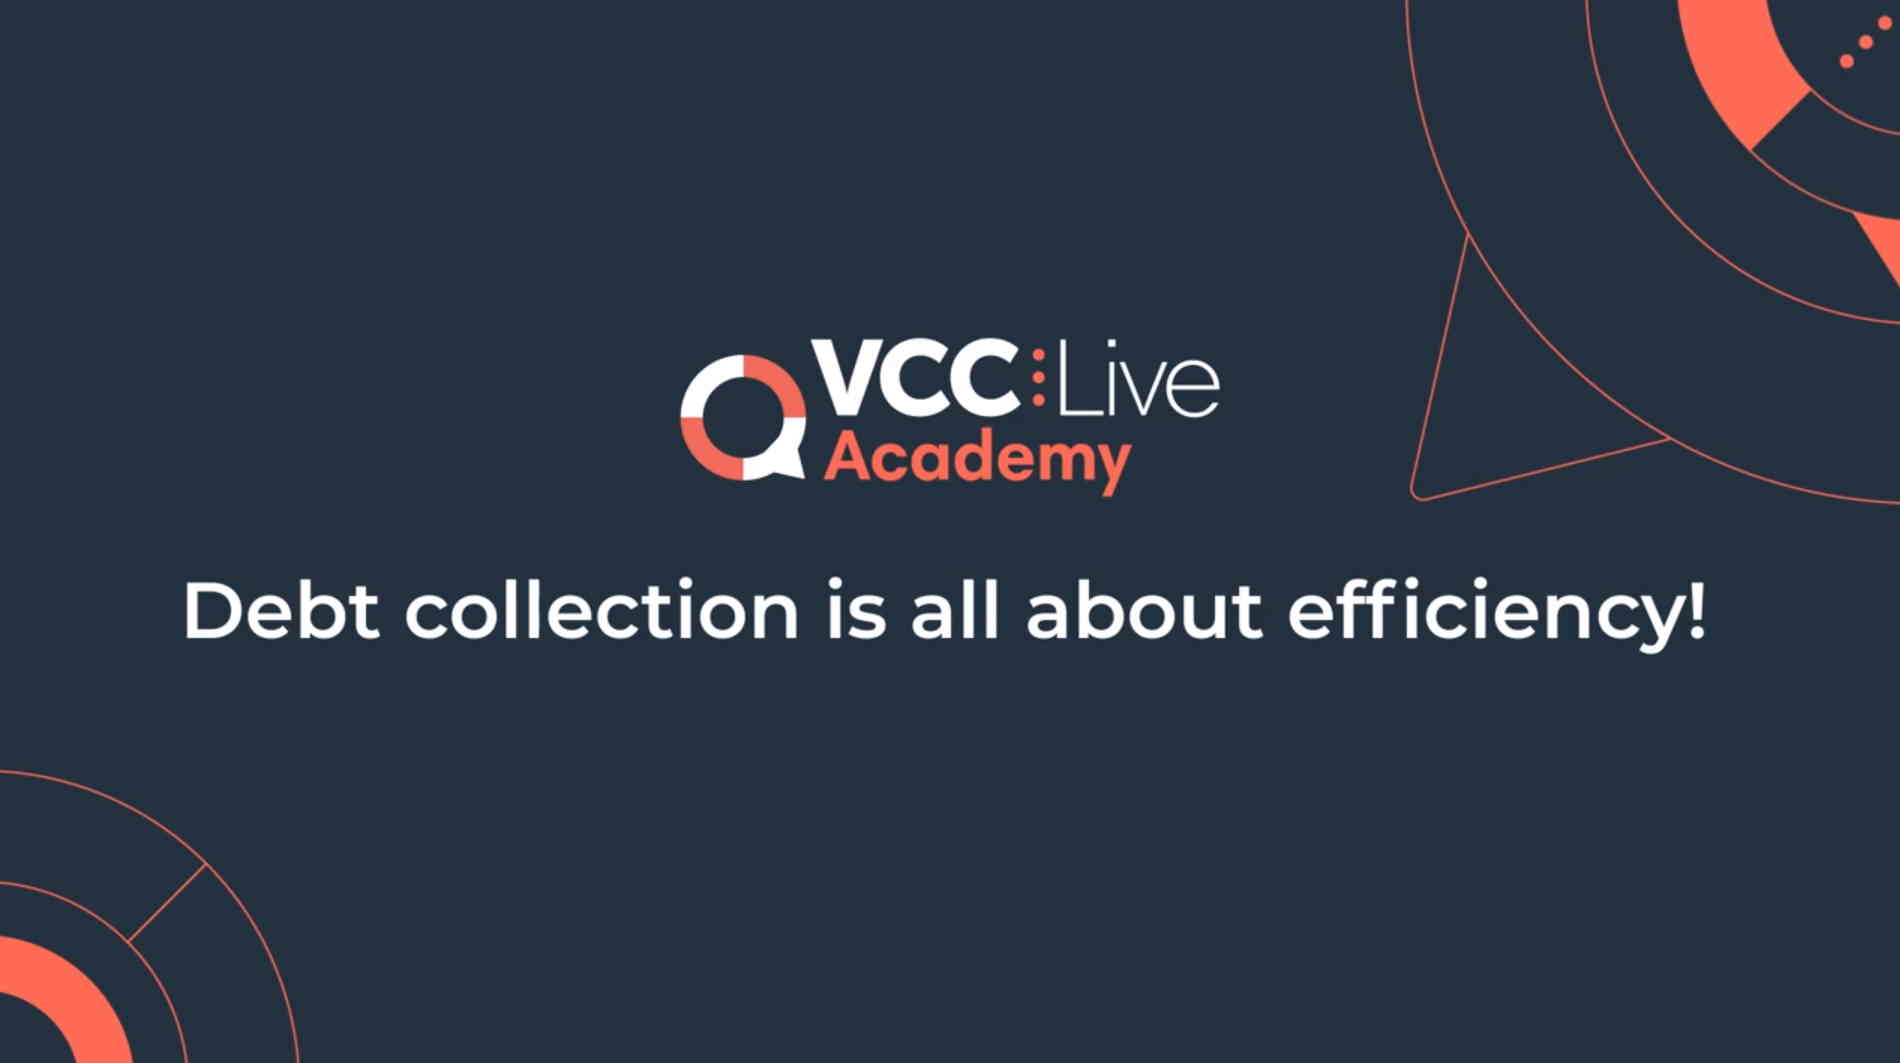 https://vcc.live/wp-content/uploads/2022/08/debt-collection-course-all-about-efficiency.jpg